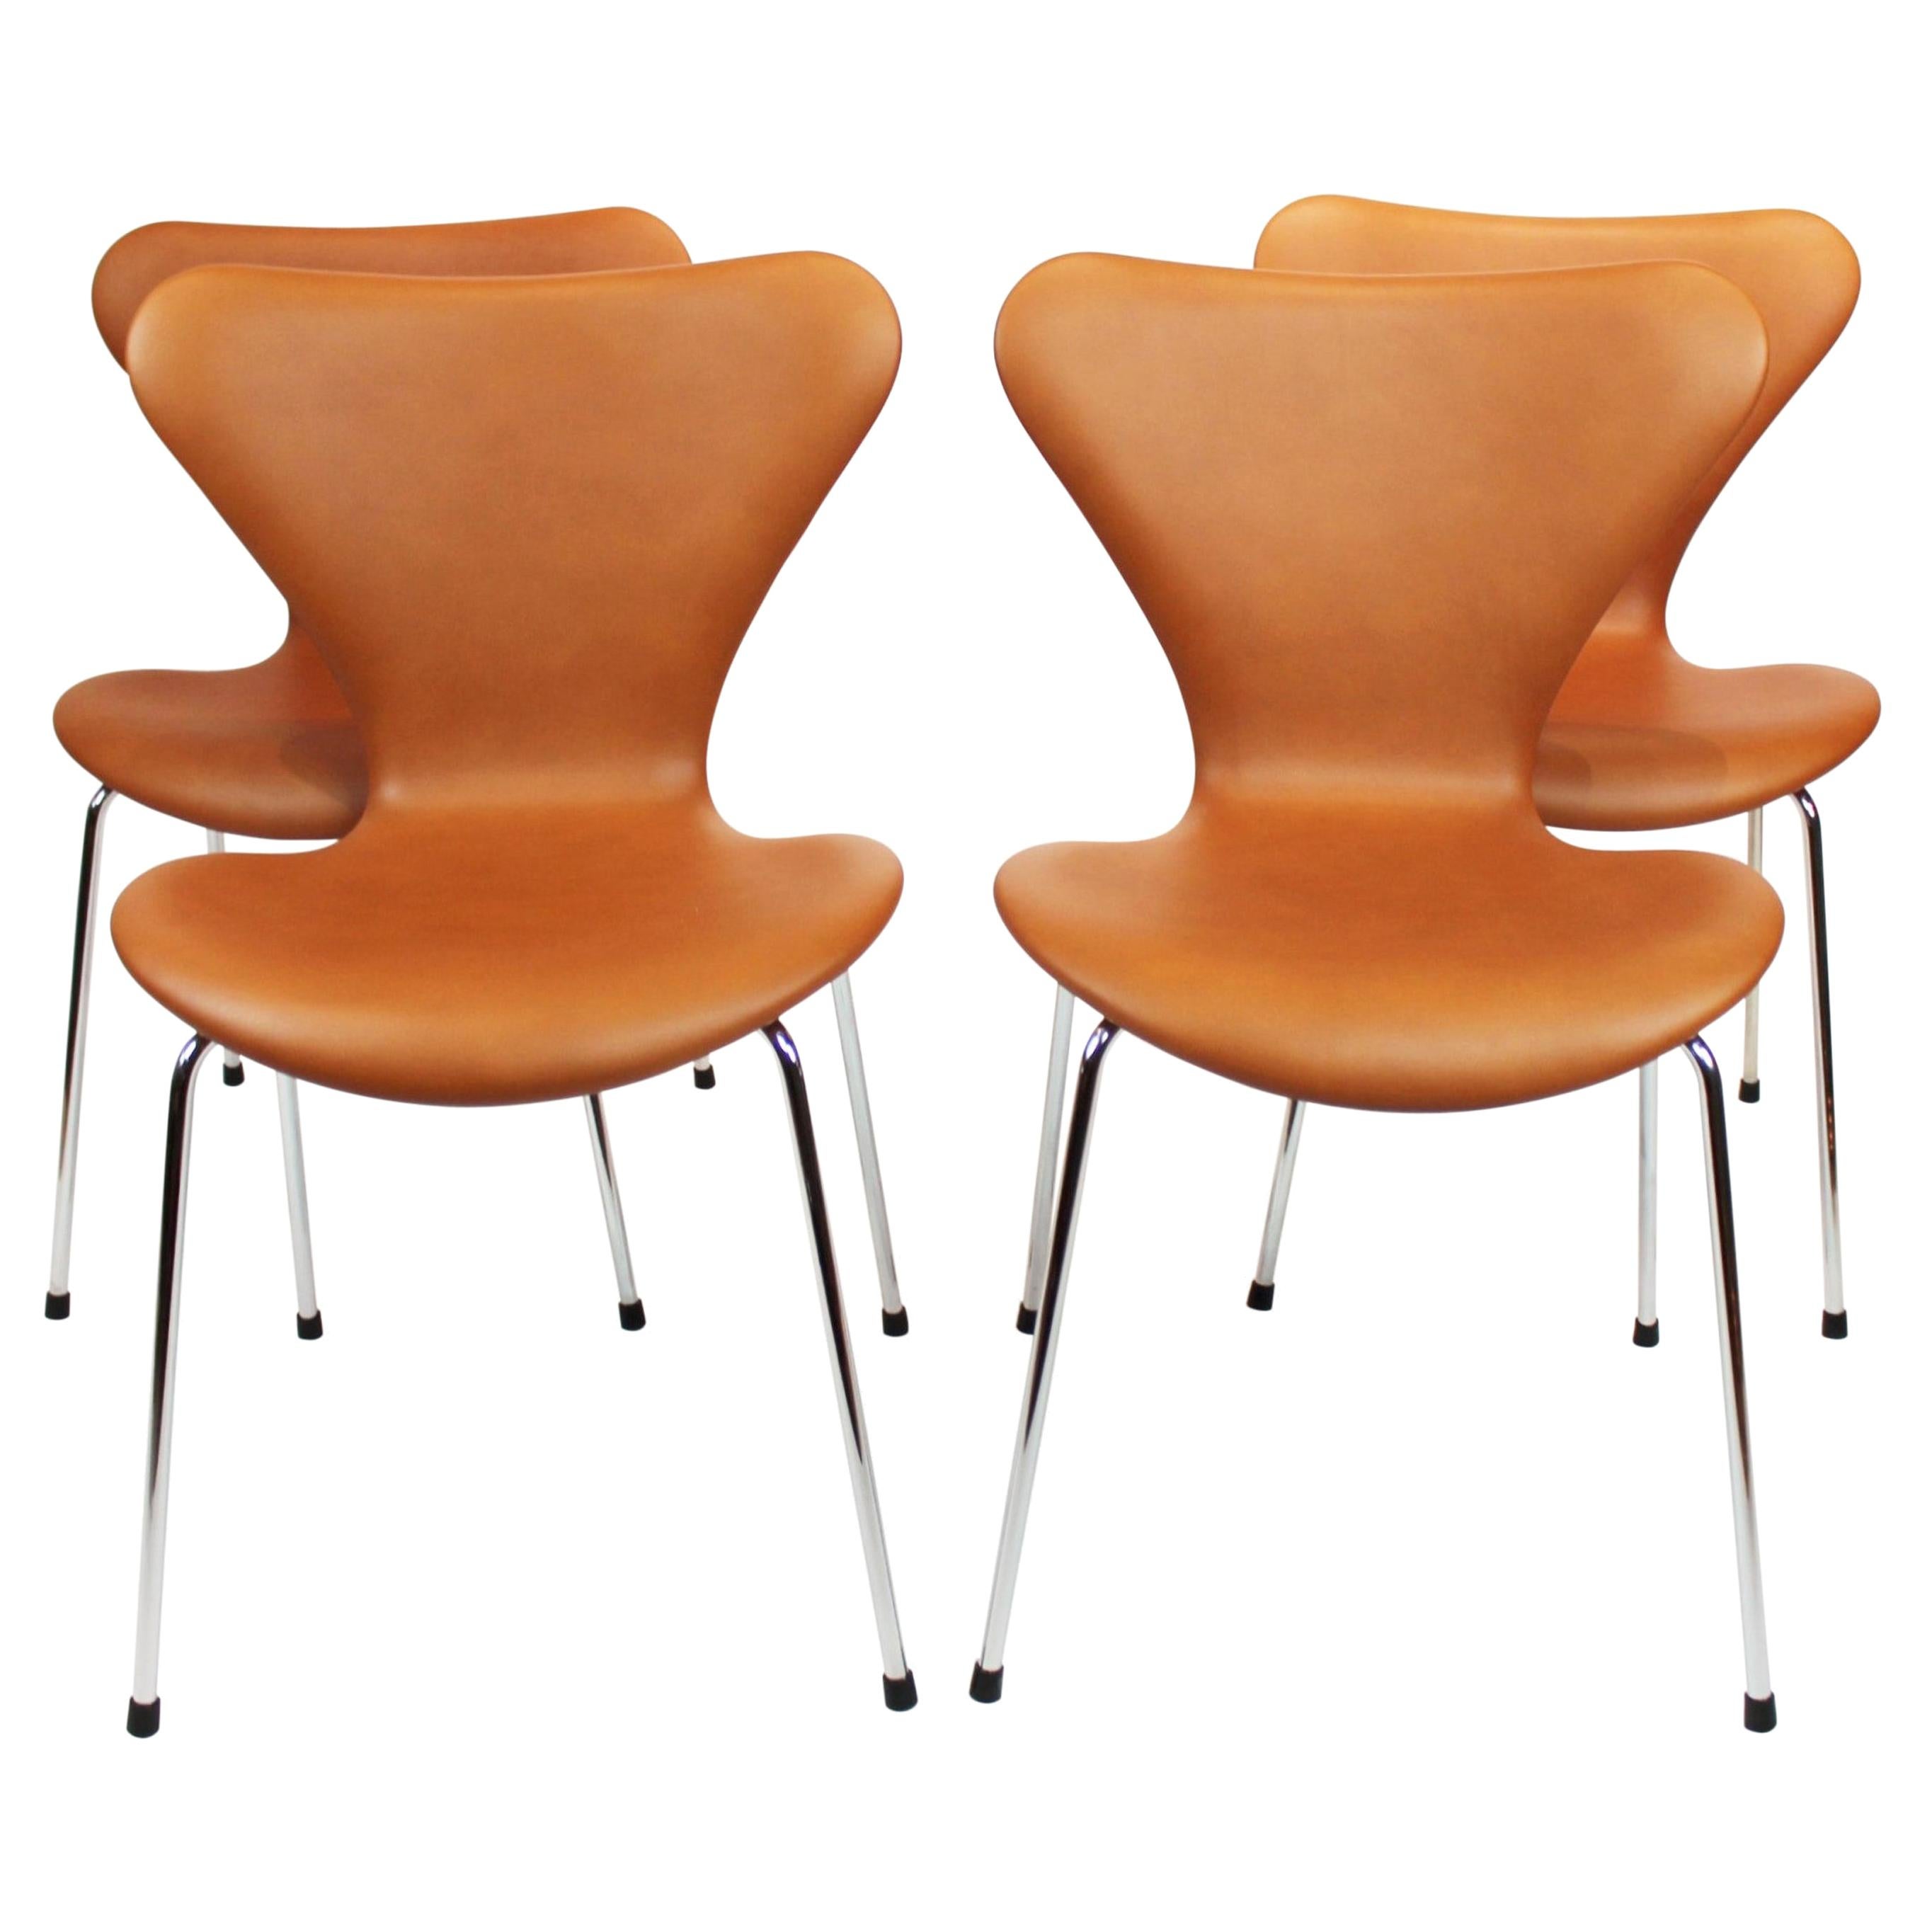 Set of four Series Seven Chairs, Model 3107, cognac leather, Arne Jacobsen